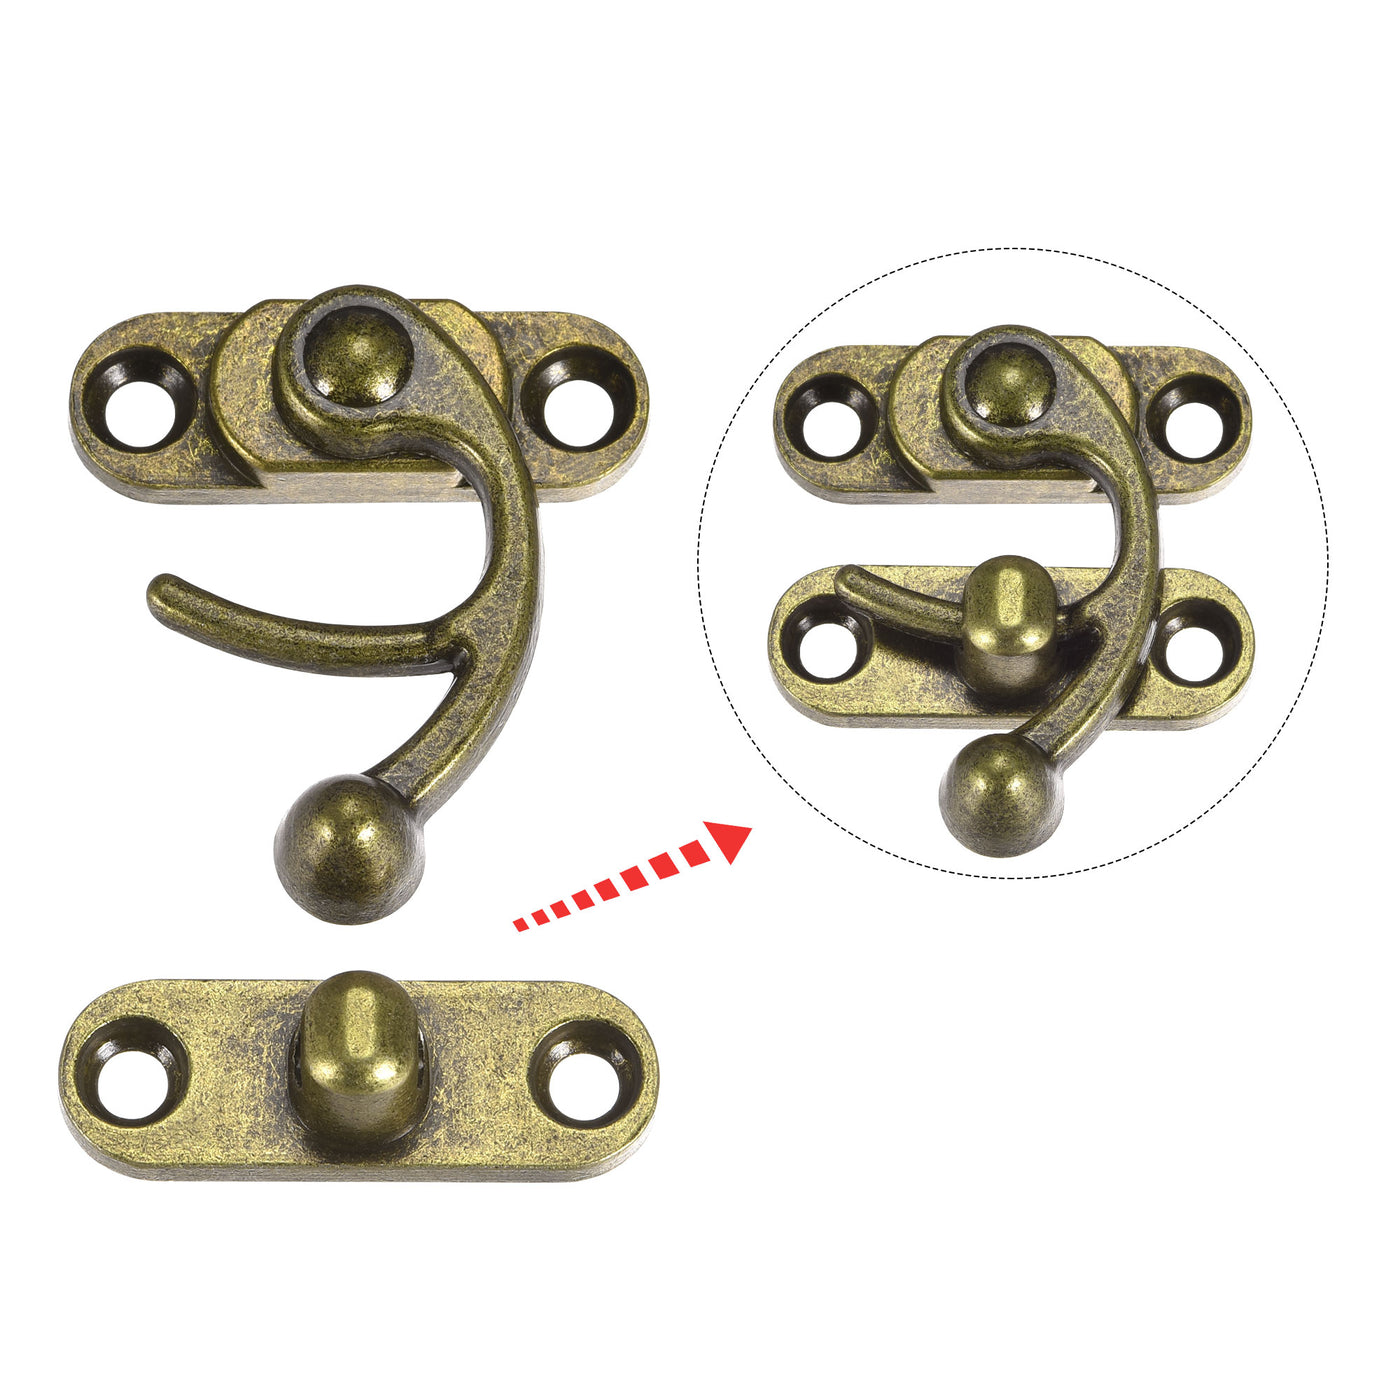 uxcell Uxcell Antique Vintage Lock Clasp Right Latch Hook Hasp 45mmx39mm Swing Arm Latch Bronze Tone 2 Pcs